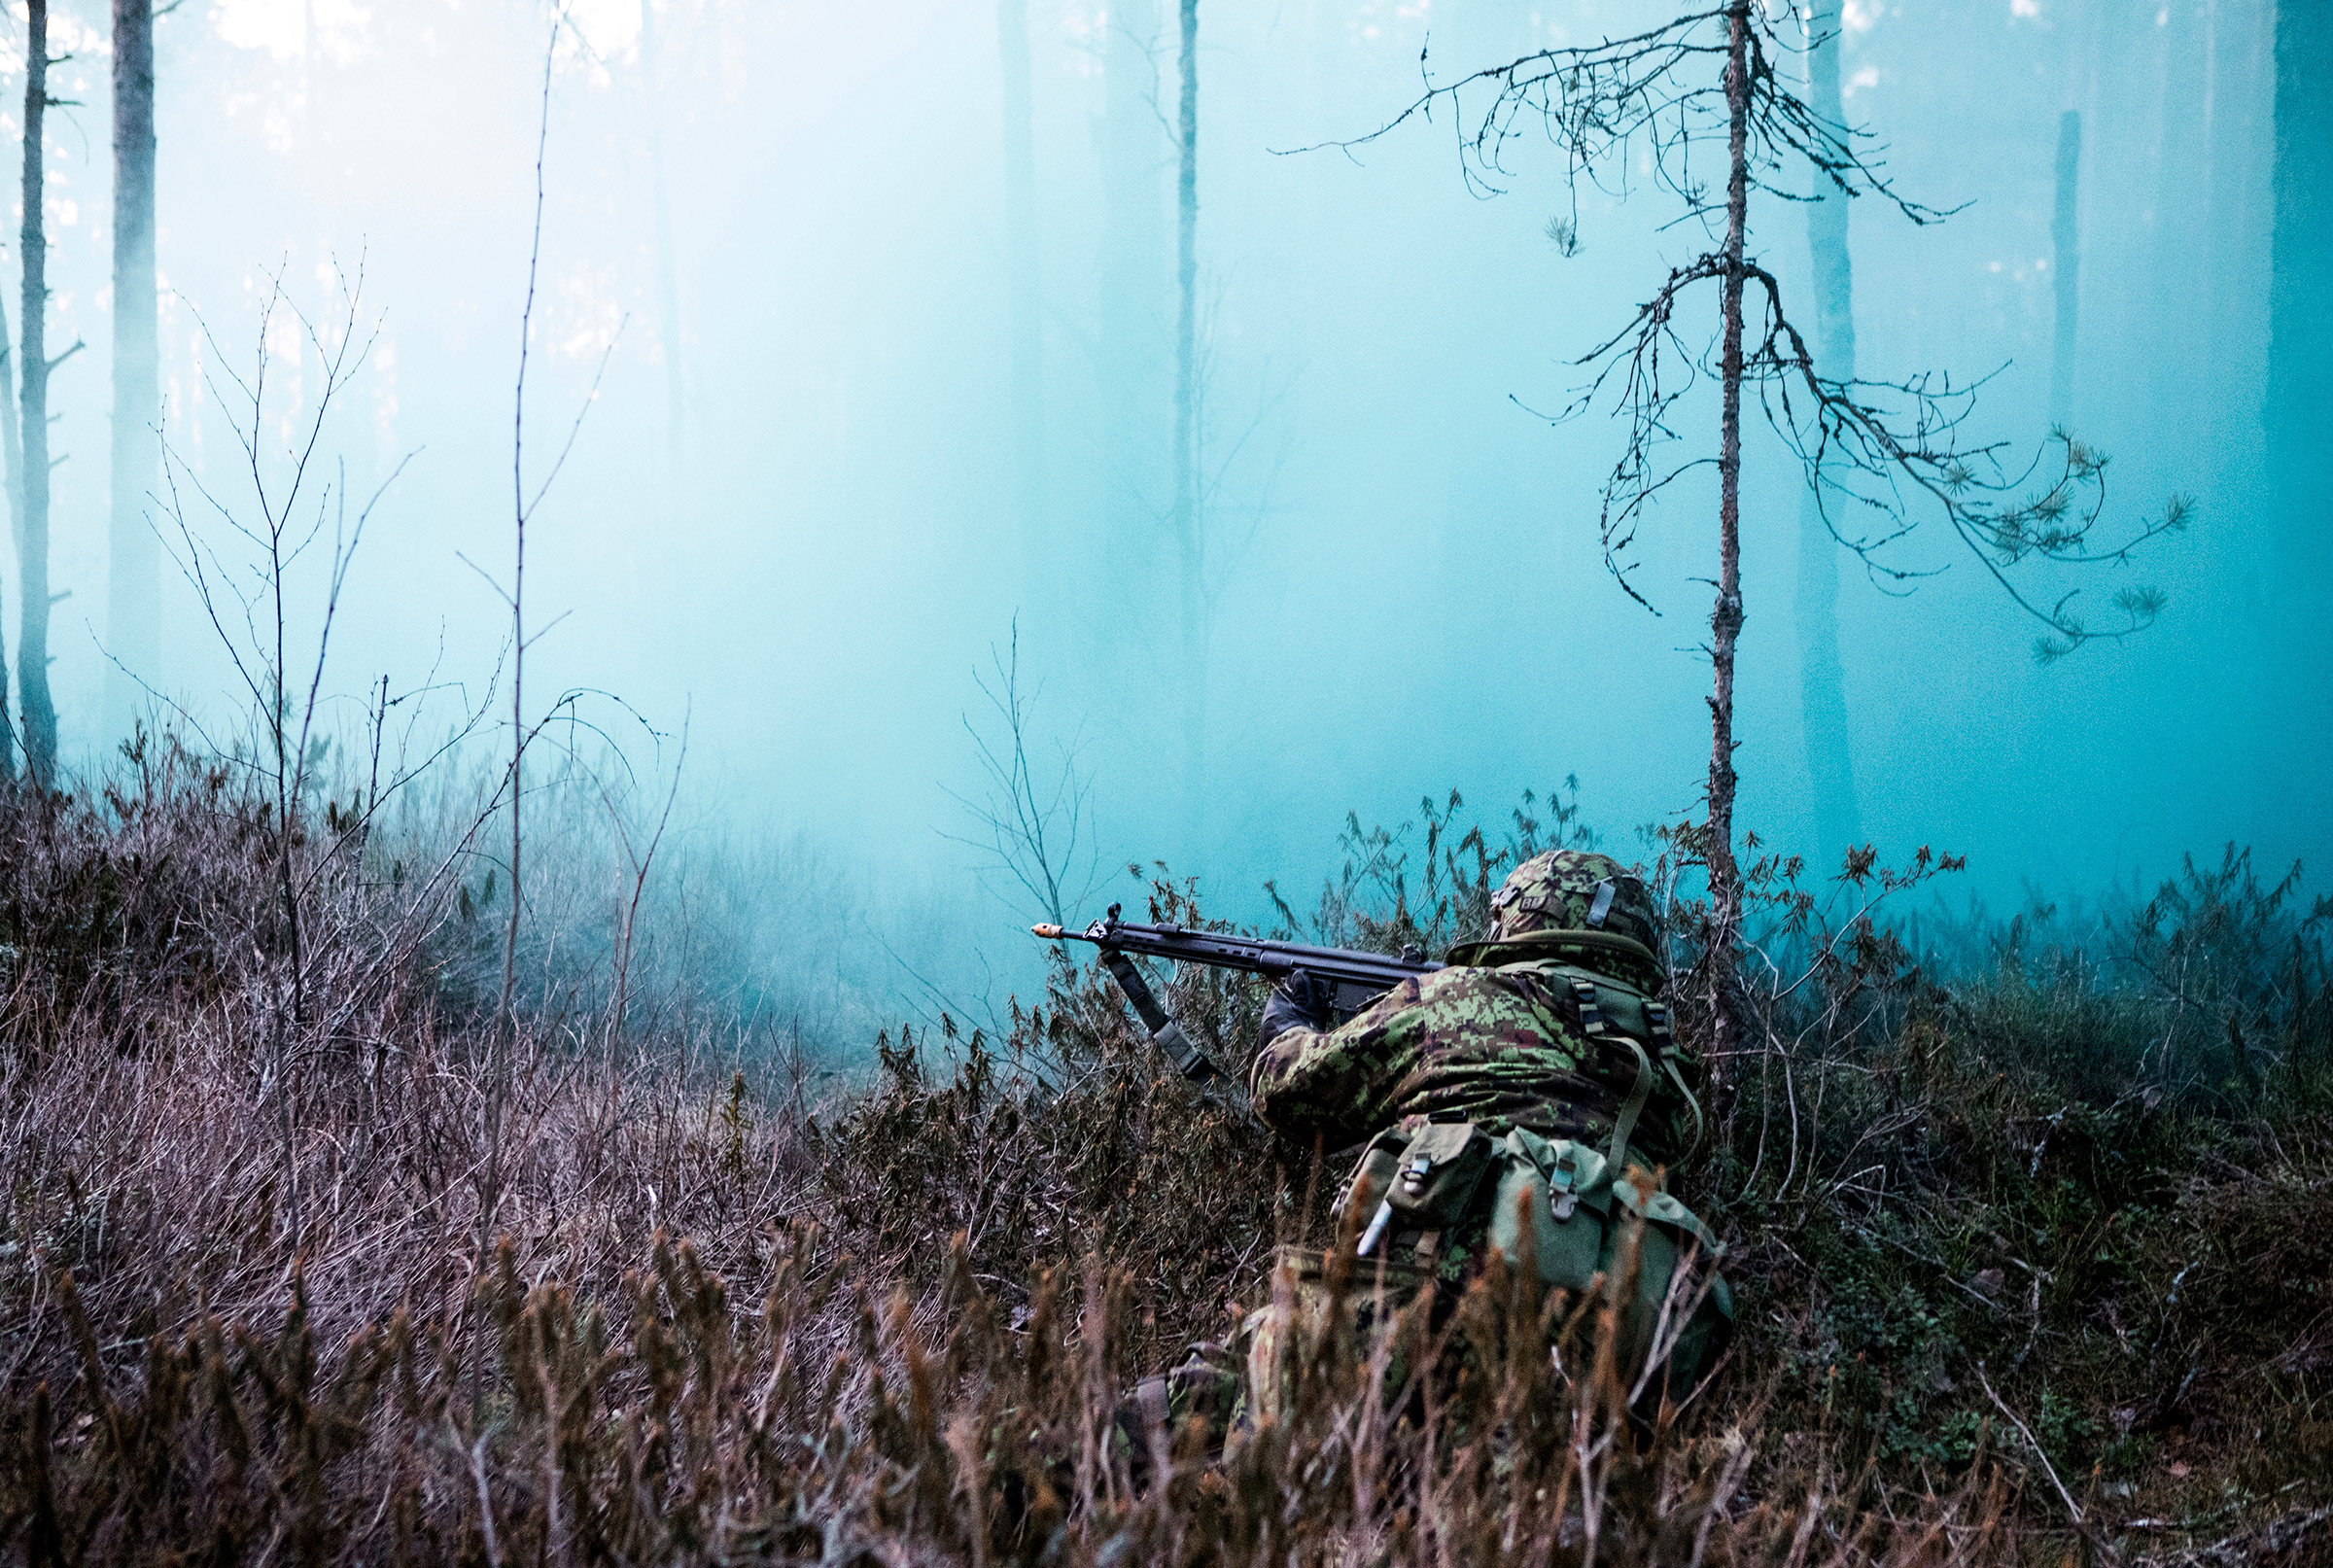 A member of the Estonian Defense League in the forests of Klooga, Estonia on March 27. (Birgit Püve for TIME)